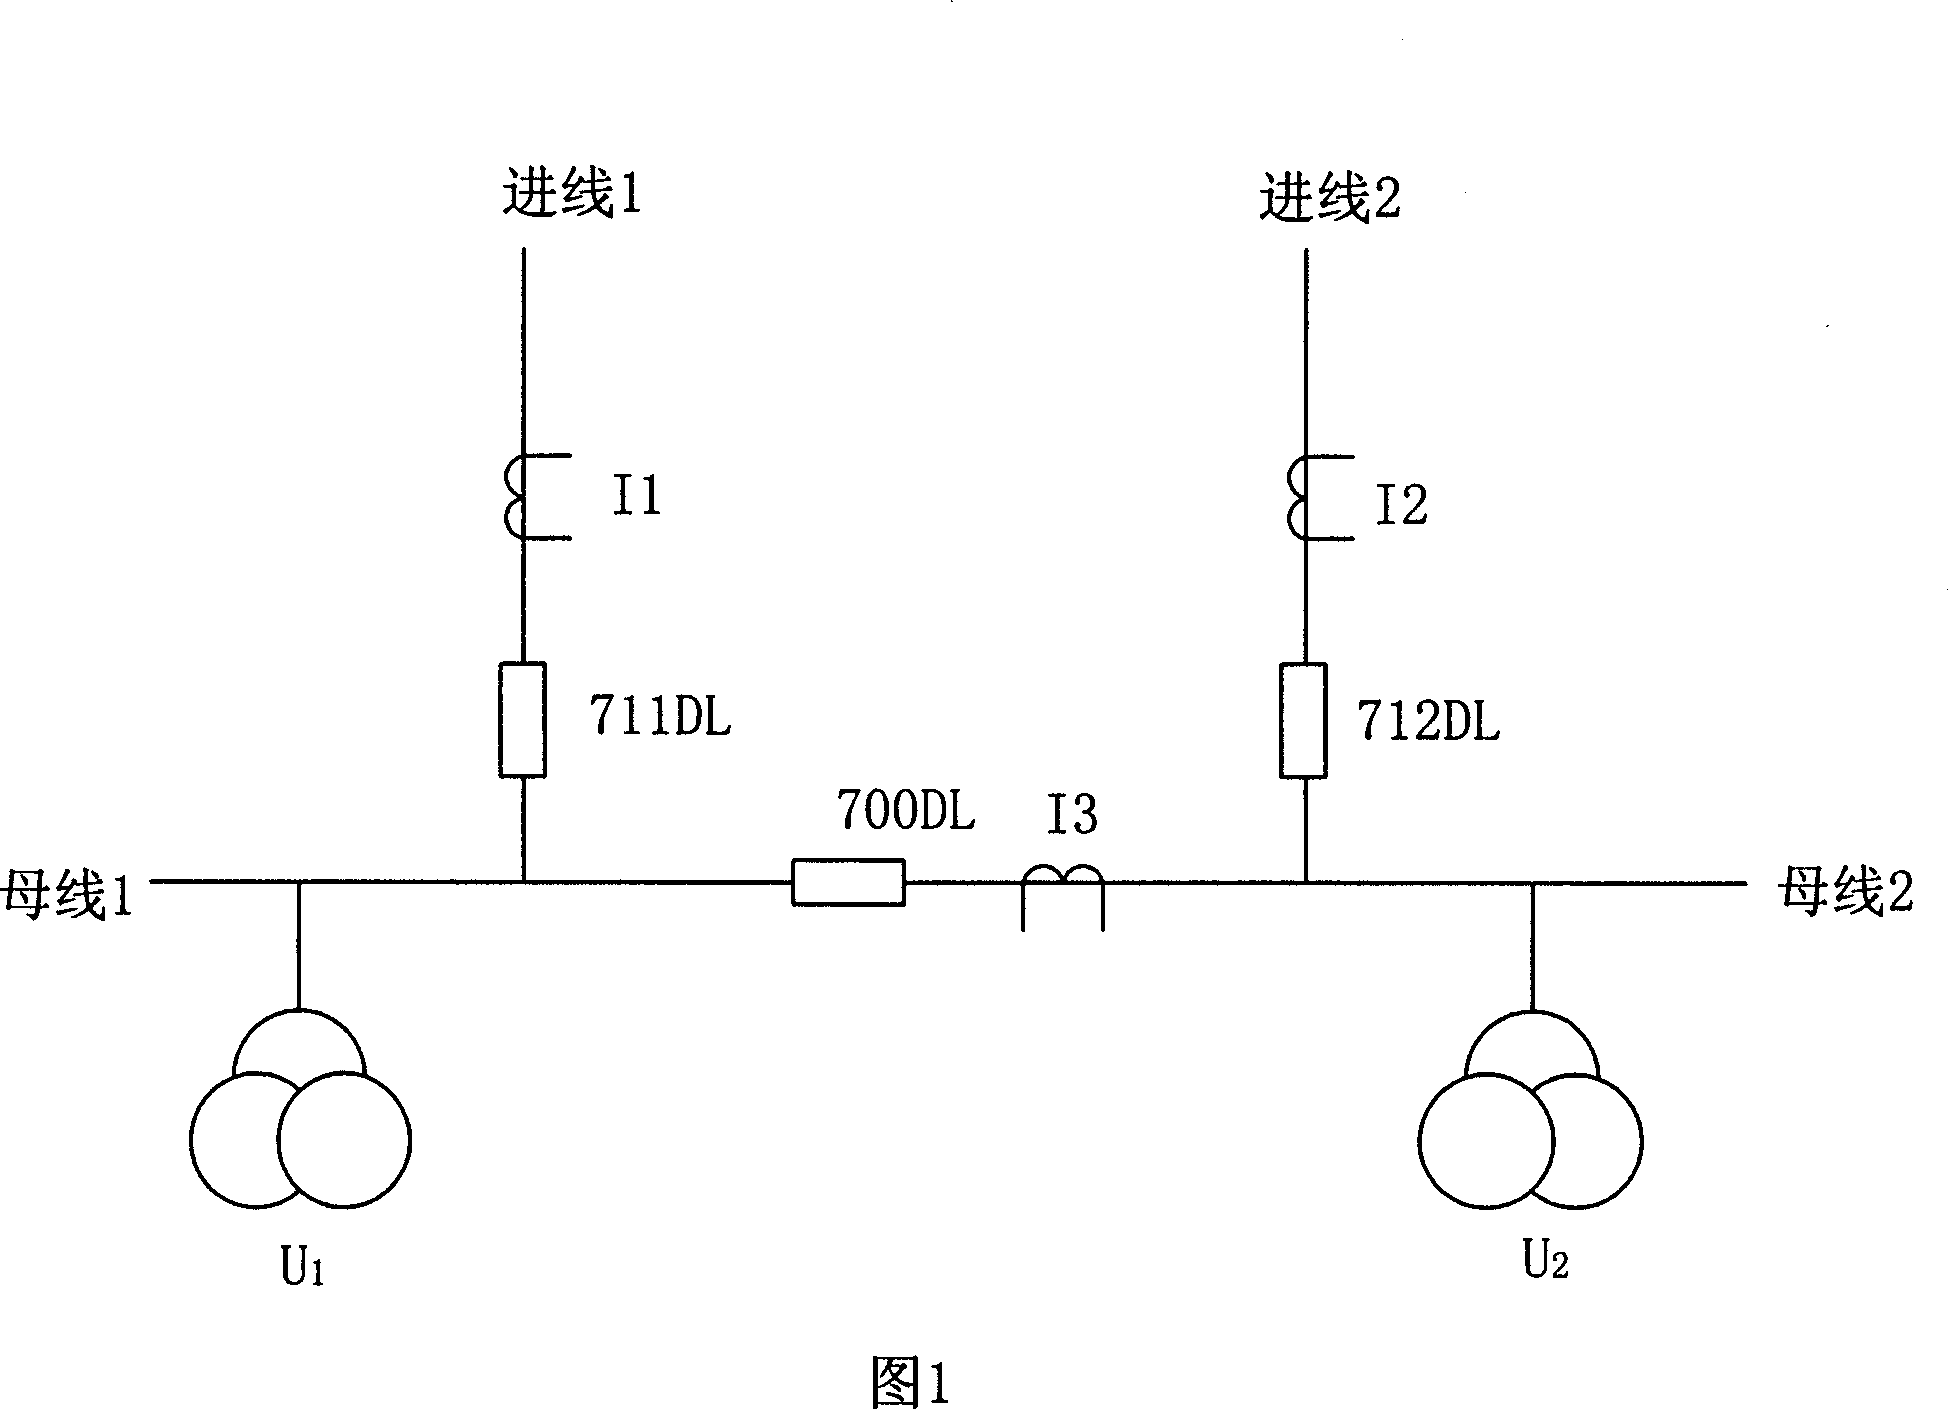 Quick switching method of the transformation station power supply